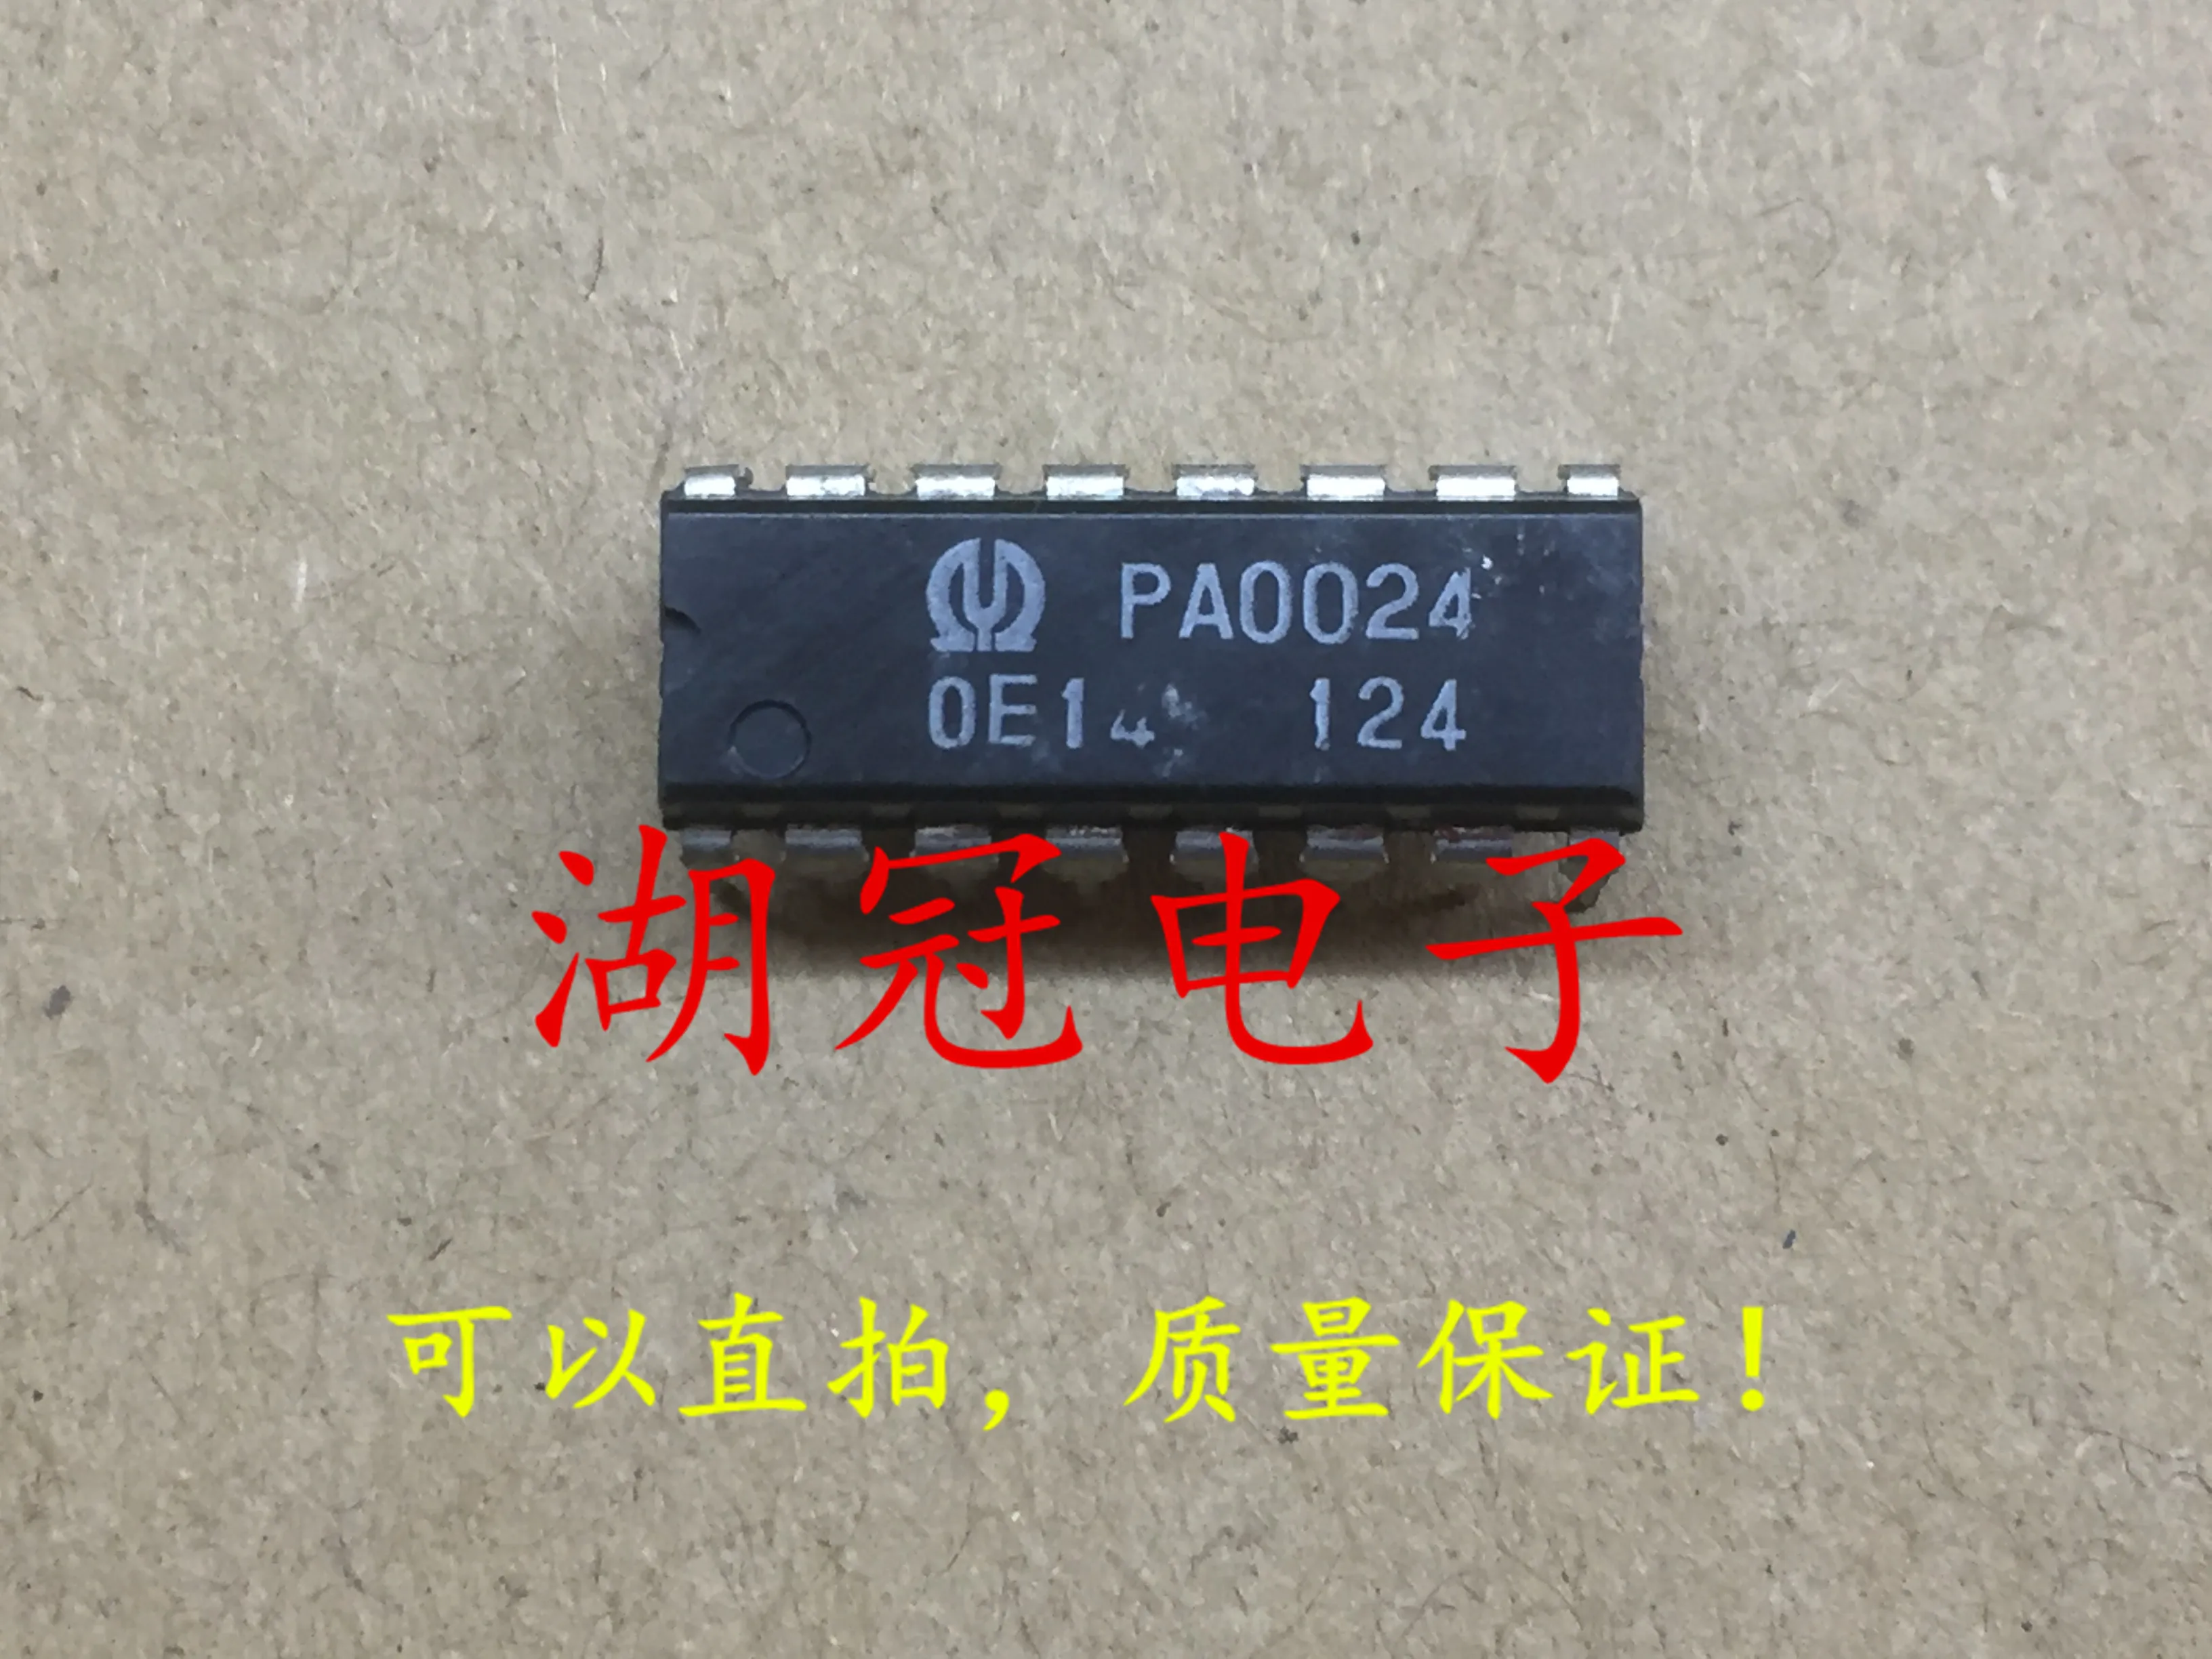 

10pcs original new PA0024 PA0024A Paired DIP tested well